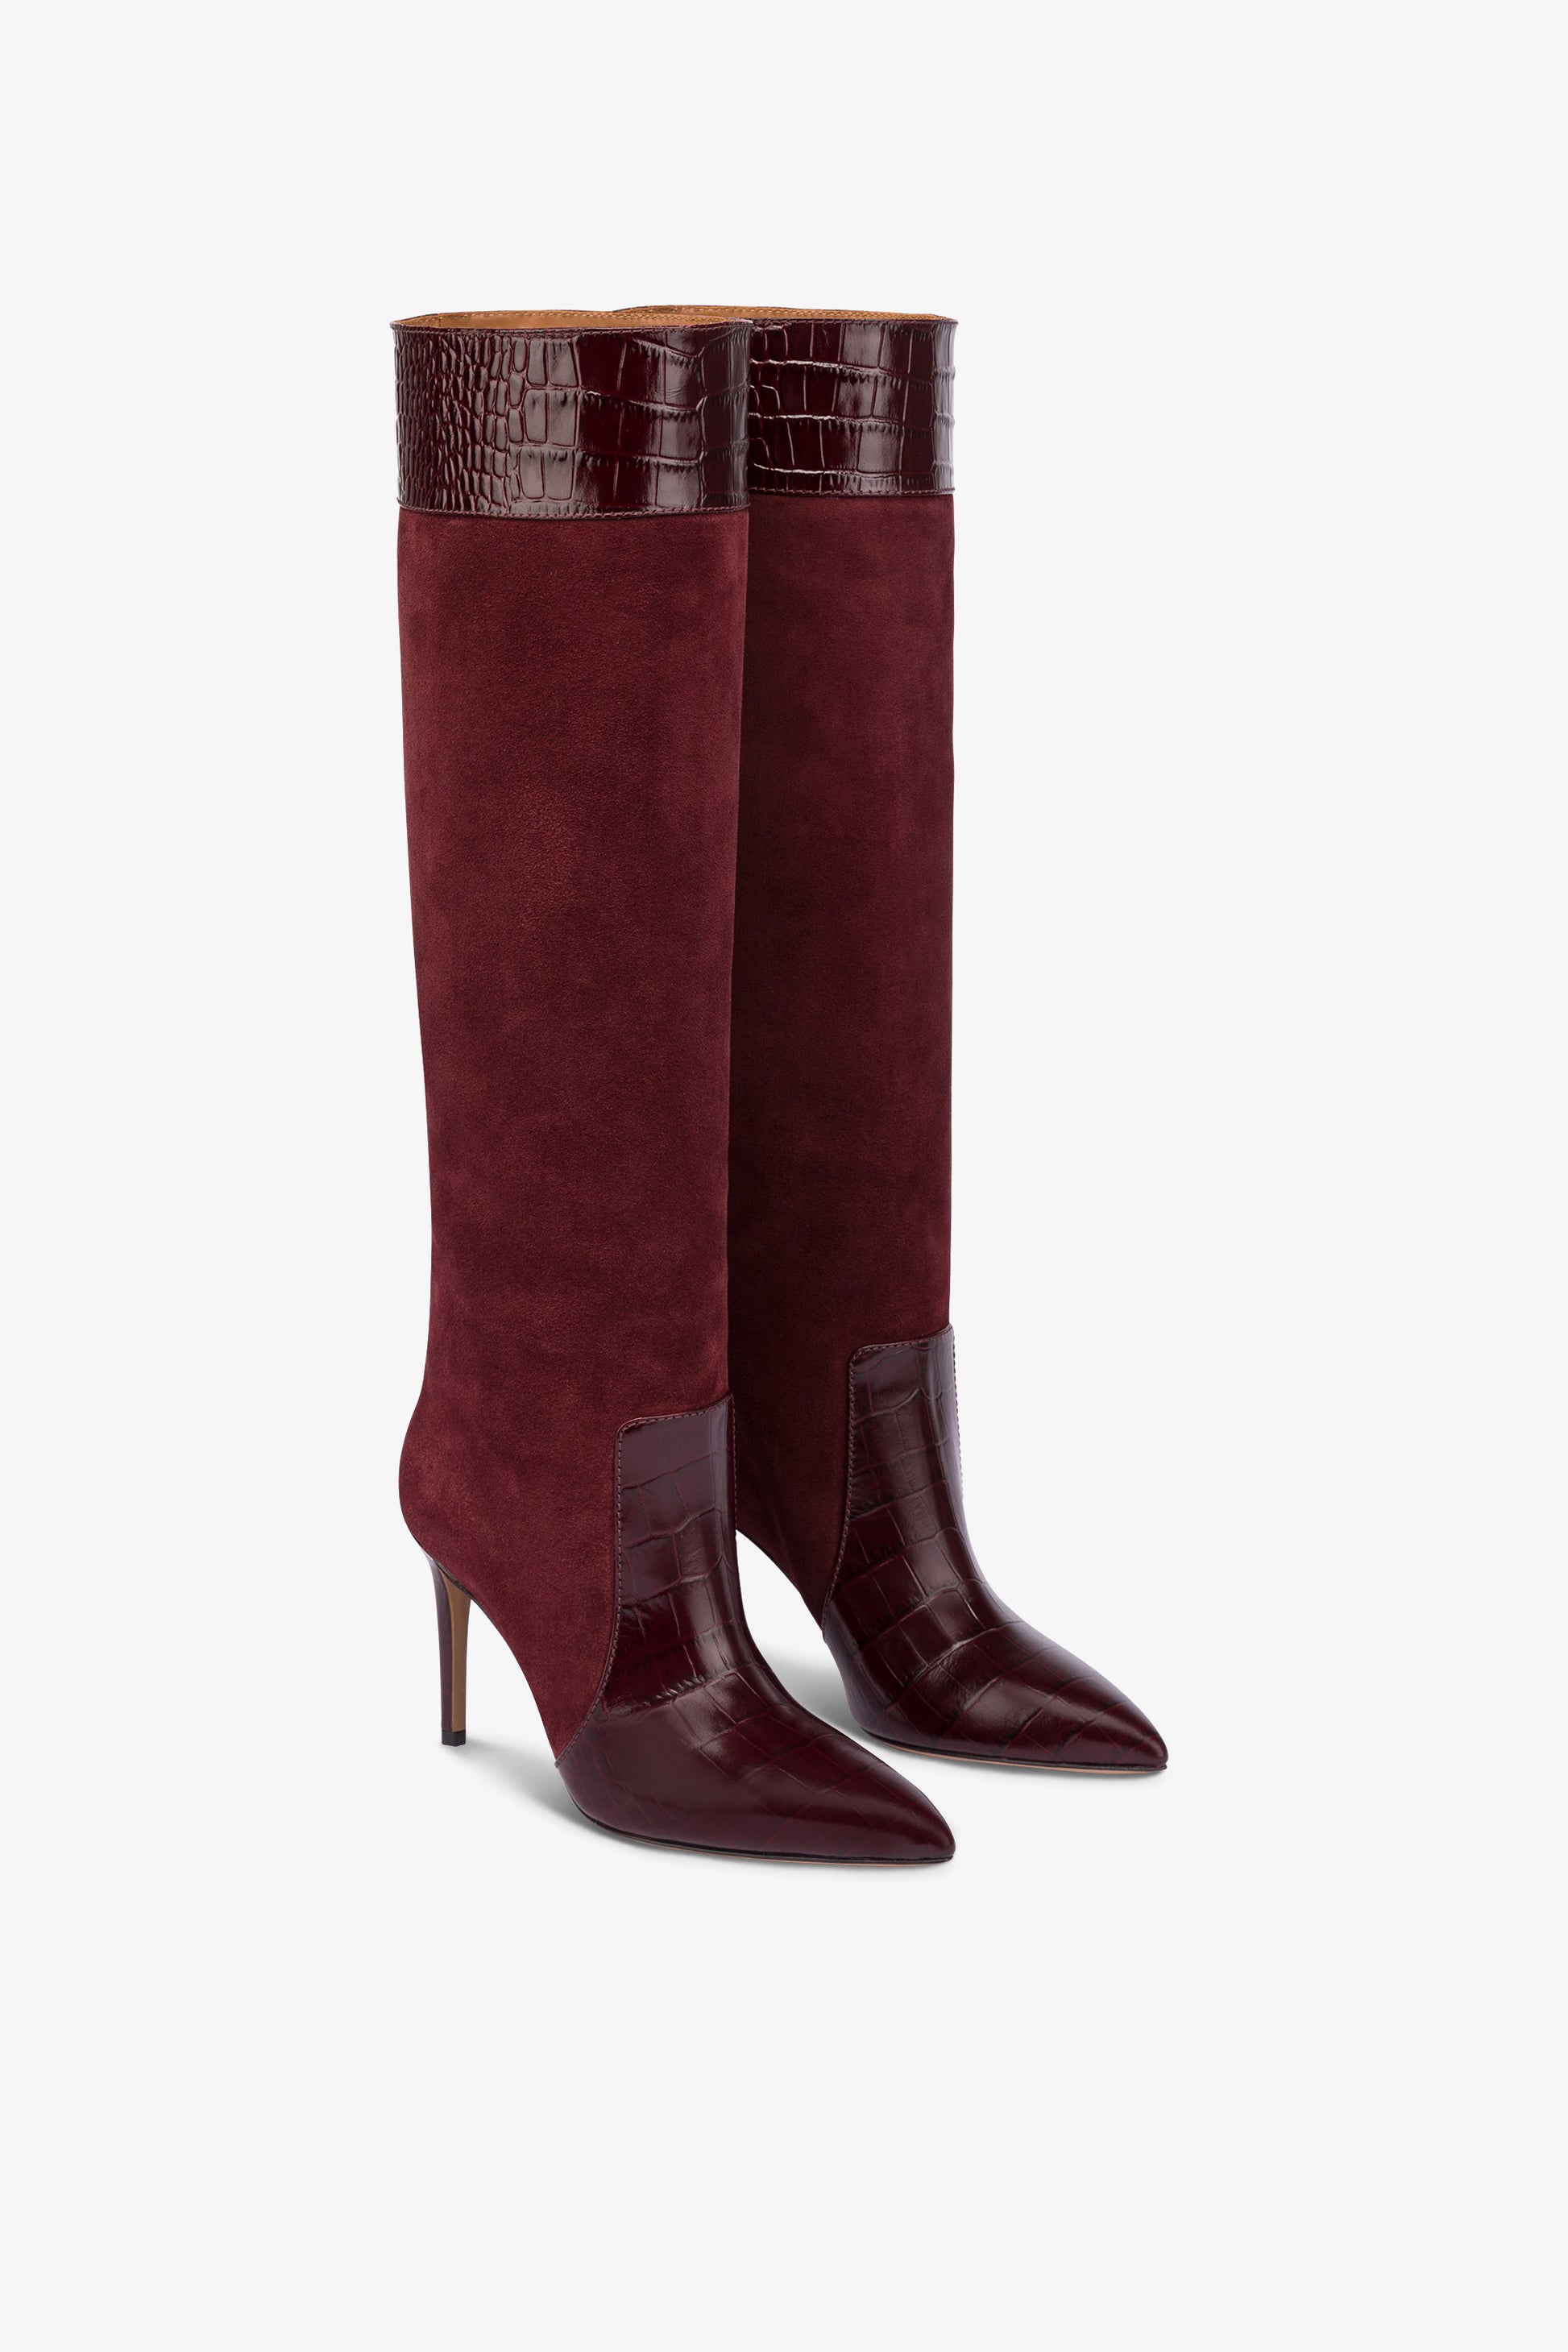 Long, pointed boots in rouge noir and Kenya croco-embossed and suede